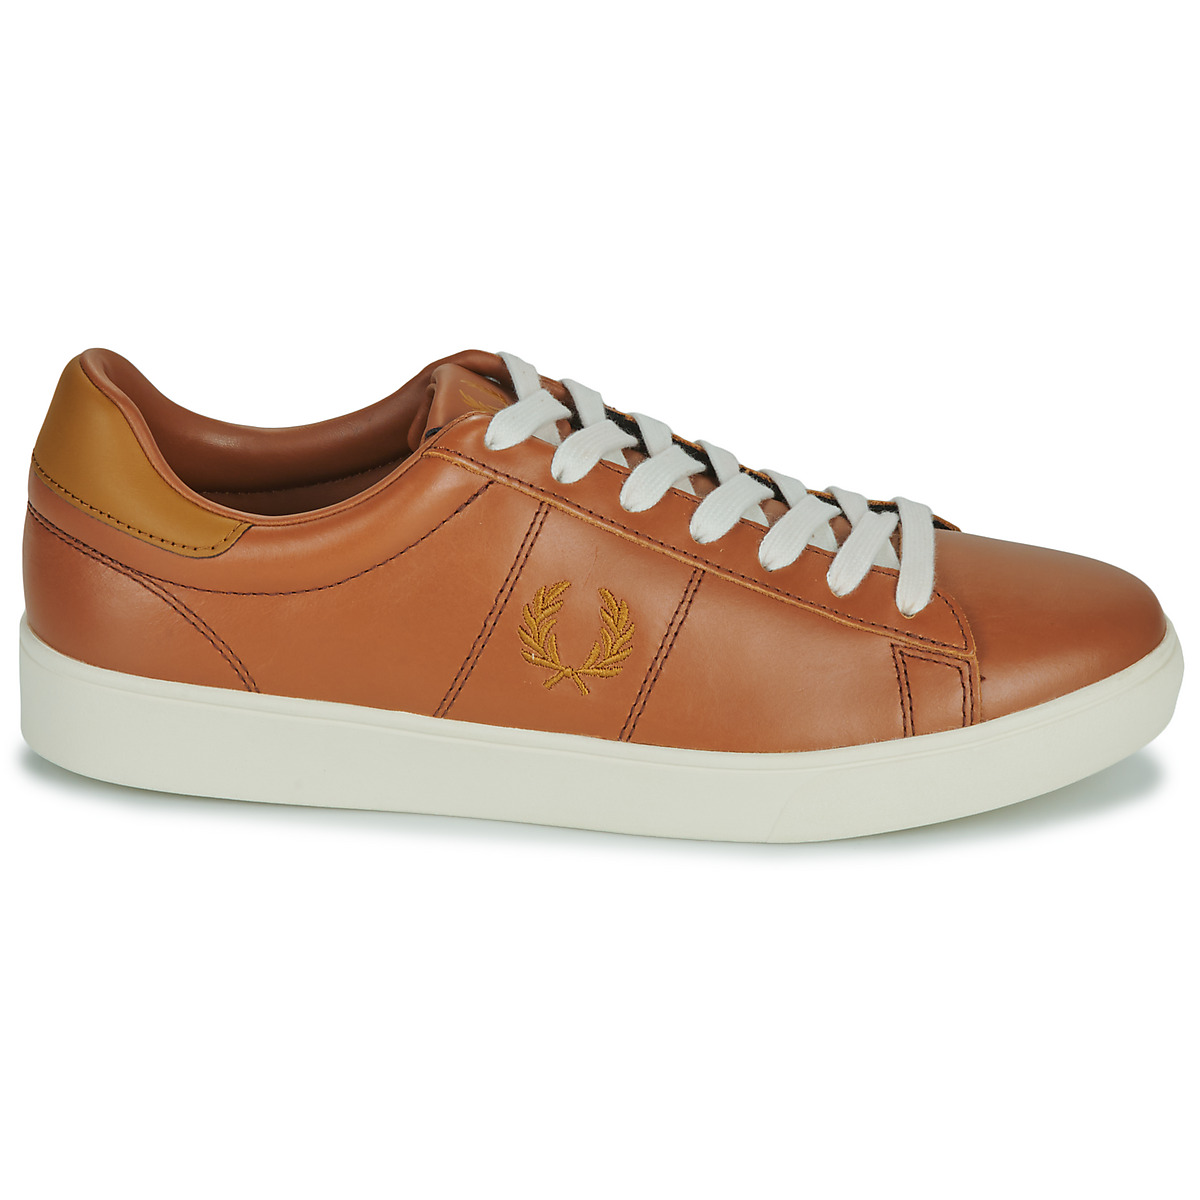 Fred Perry Marron SPENCER LEATHER vUw2S4qJ